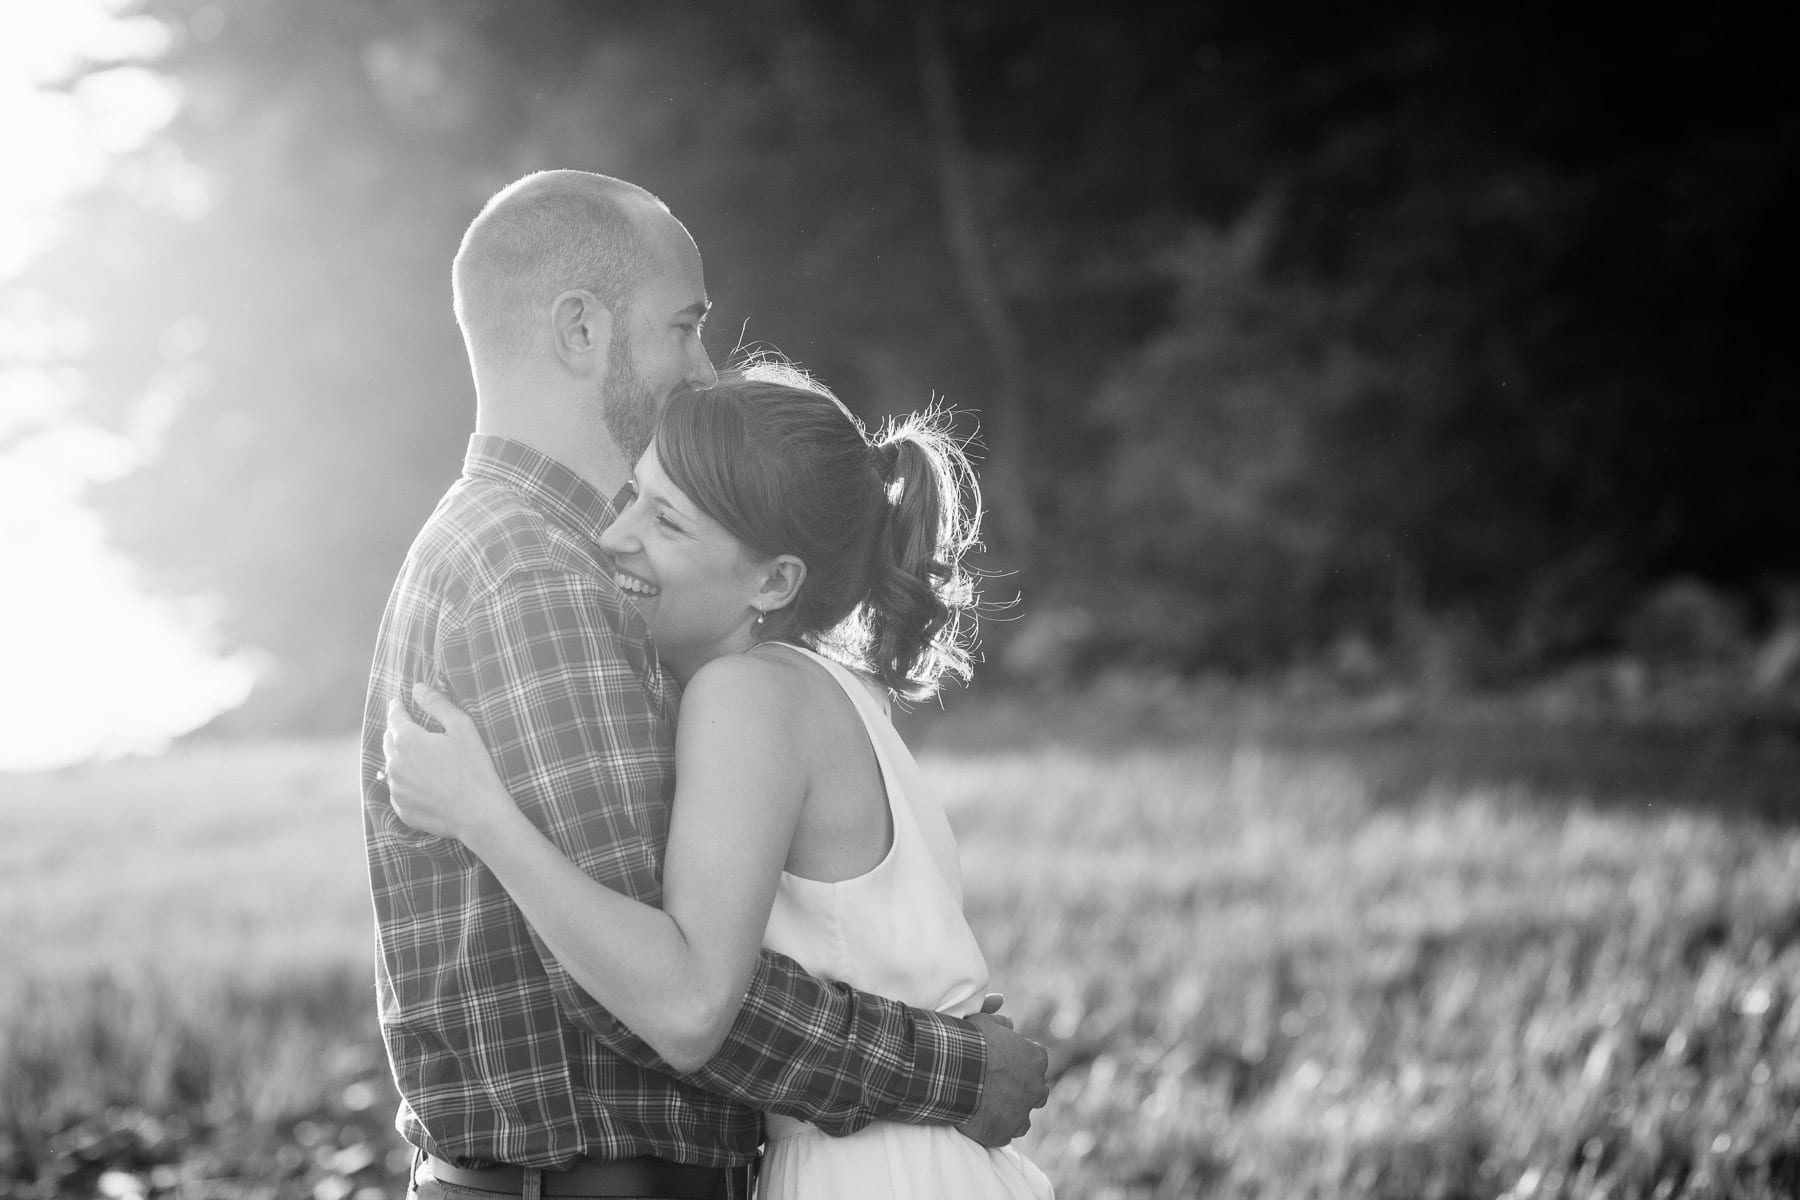 Kristen and Neds Worlds End engagement session. Photo by Kelly Benvenuto.